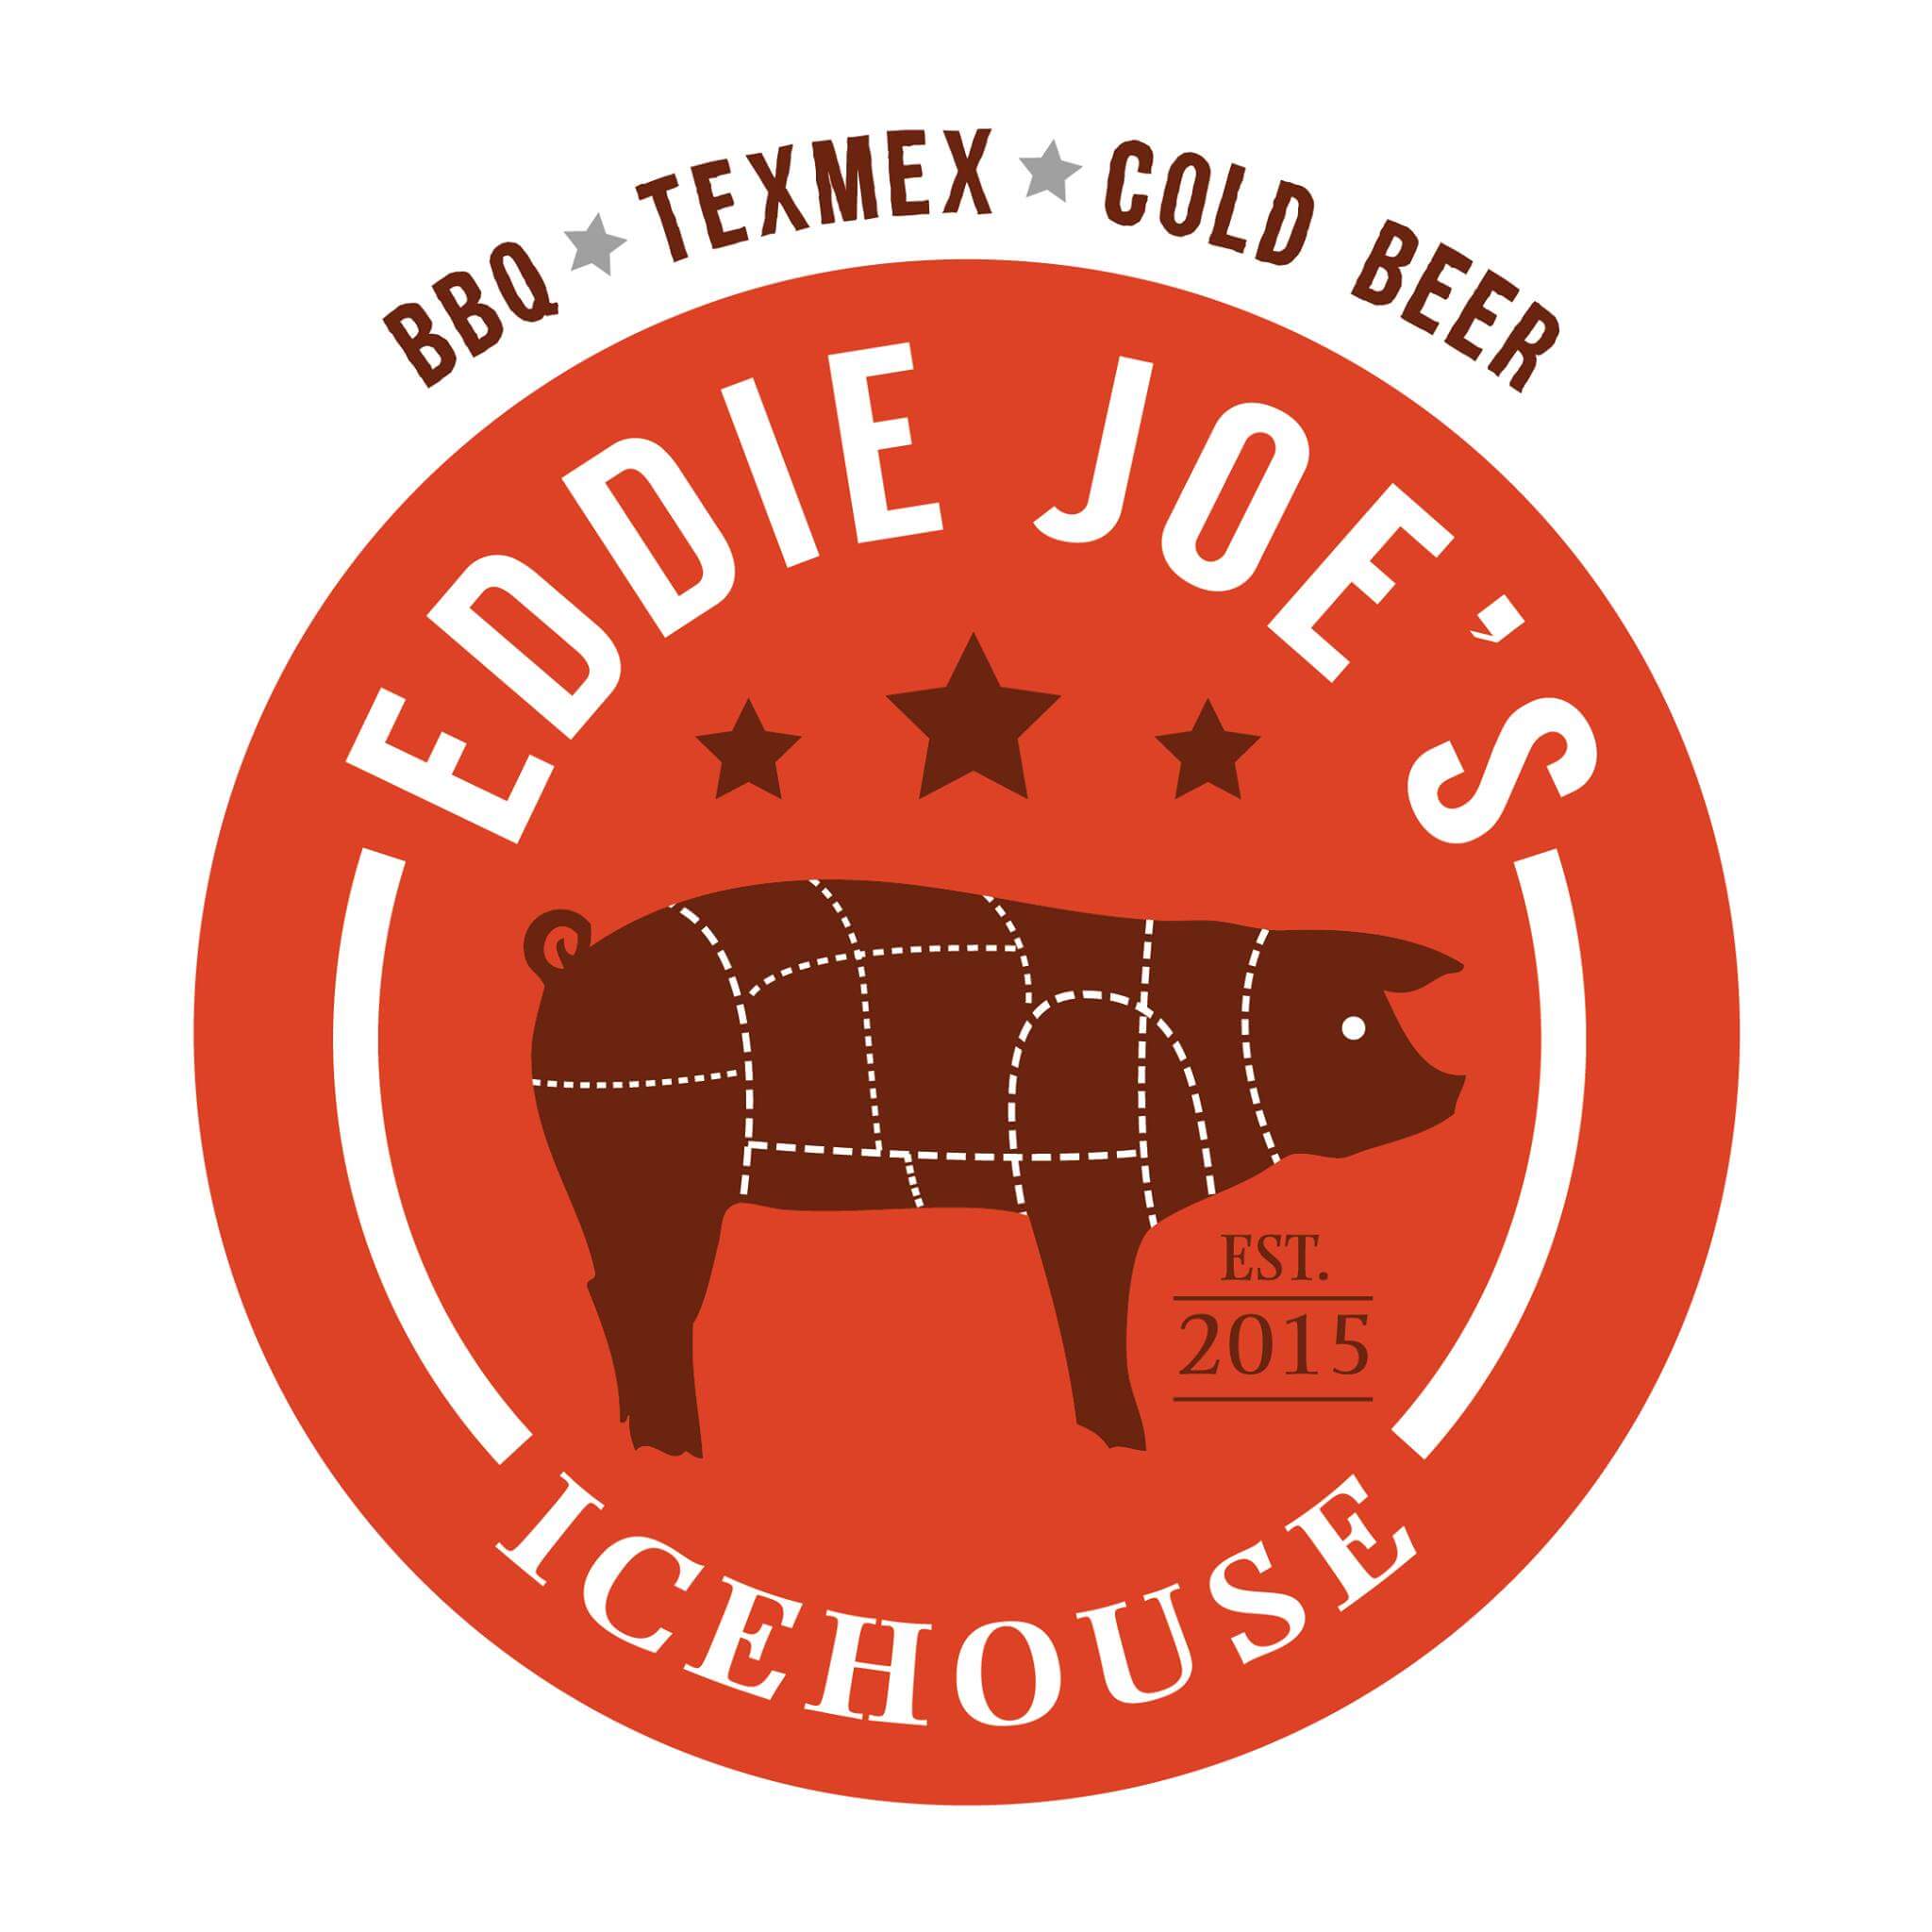 Joe's logo (red circle with drawing of a pig in maroon color showing meat cuts drawings and white letter fonts around: Eddie Joe's Icehouse)